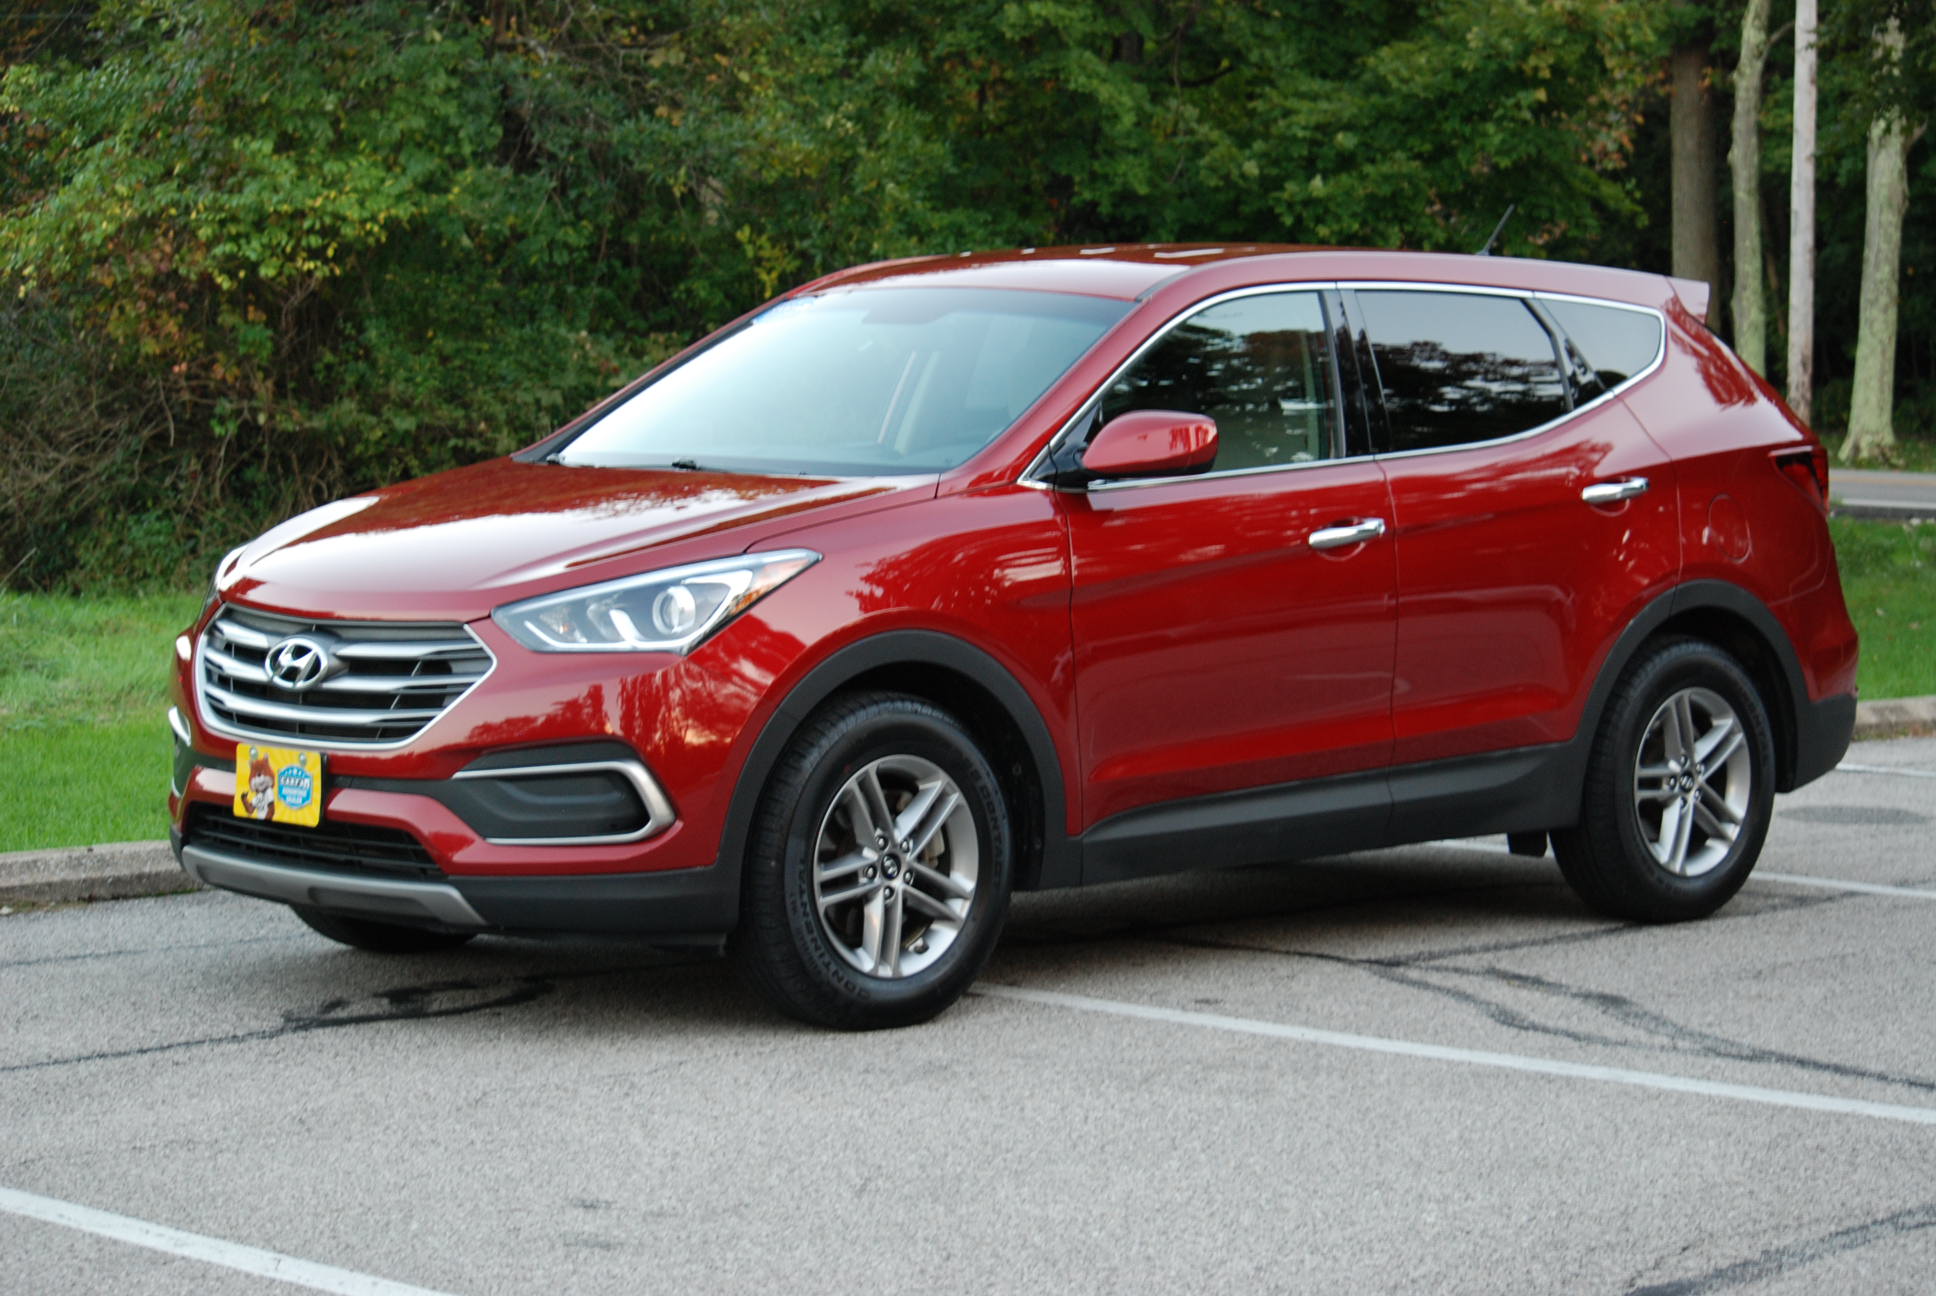 Hyundai Santa Fe 2018 Sport  2018 Hyundai Santa Fe Sport 2 4l 4dr All